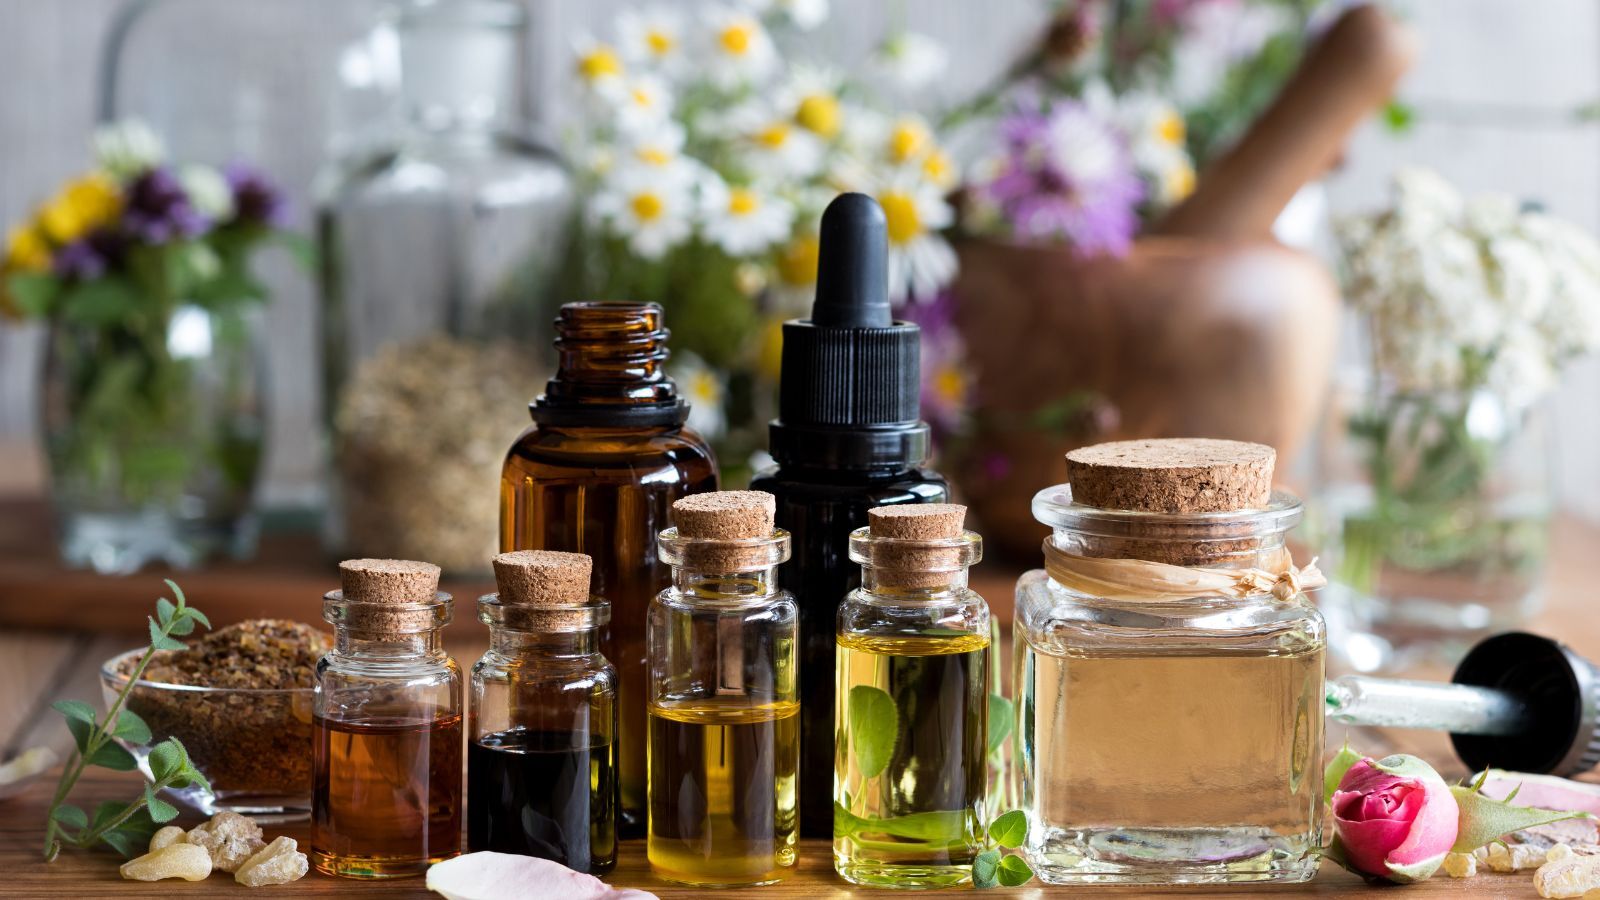 12 Best Essential Oil Brands for Relaxation & Meditation 2023